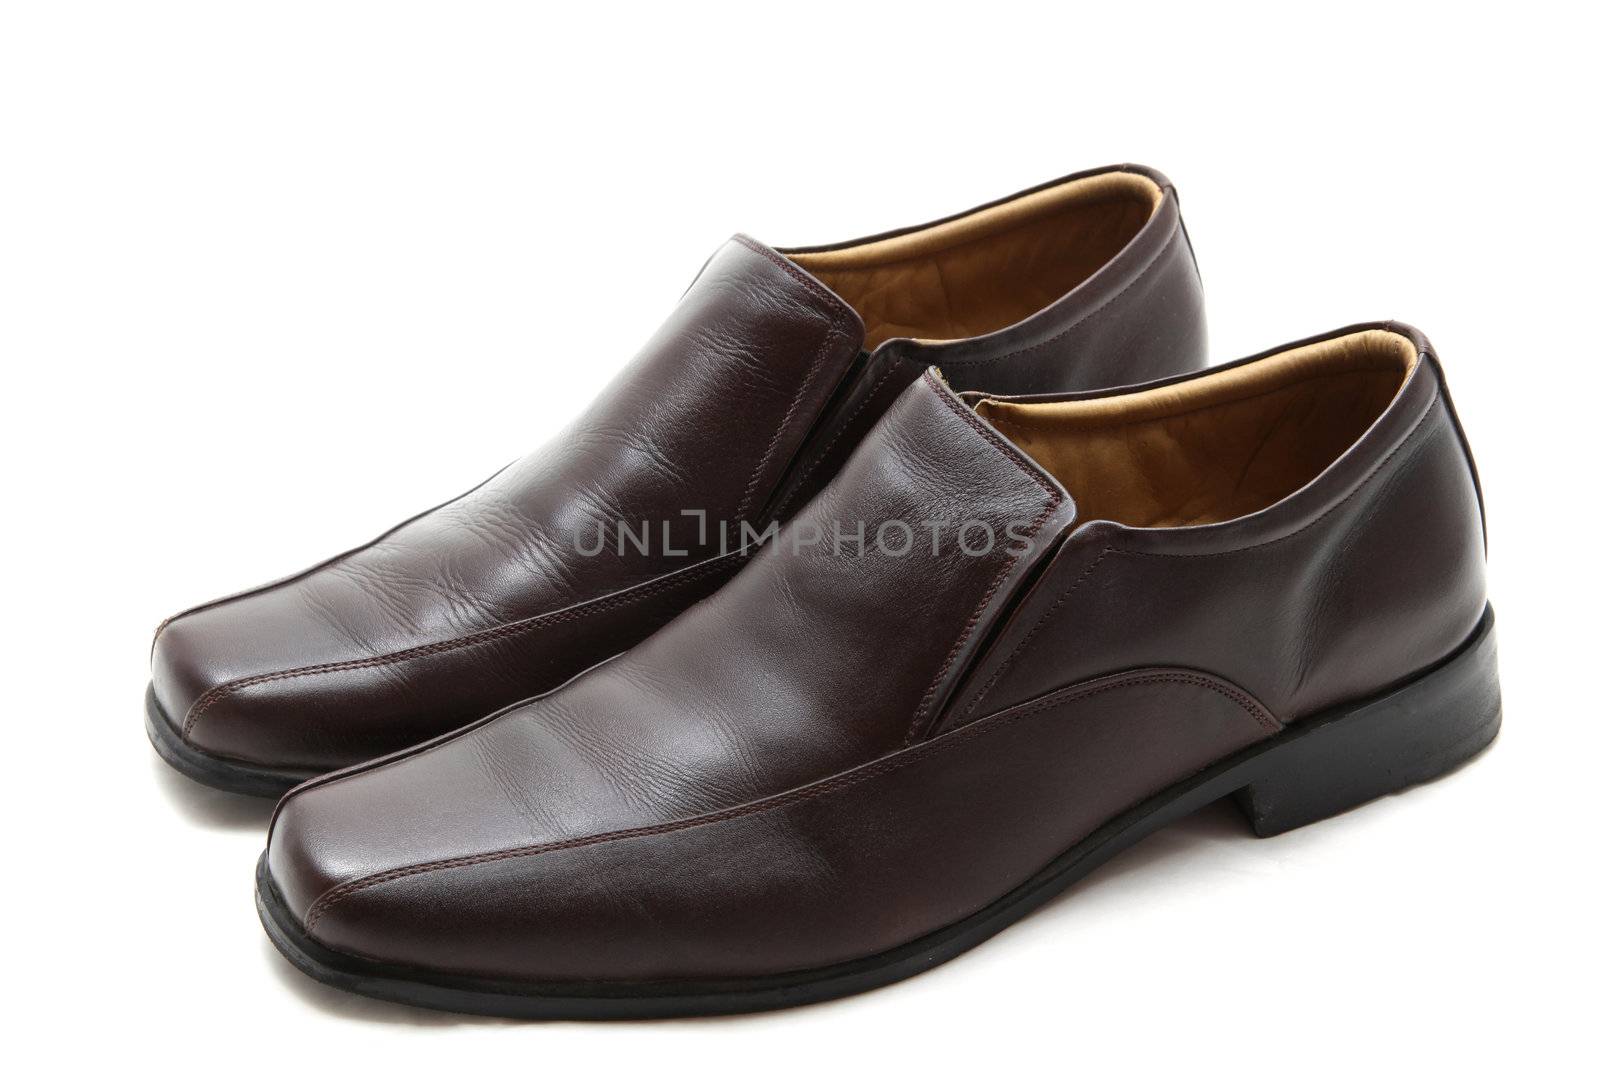 pair of luxury brown leather man shoes on a white background